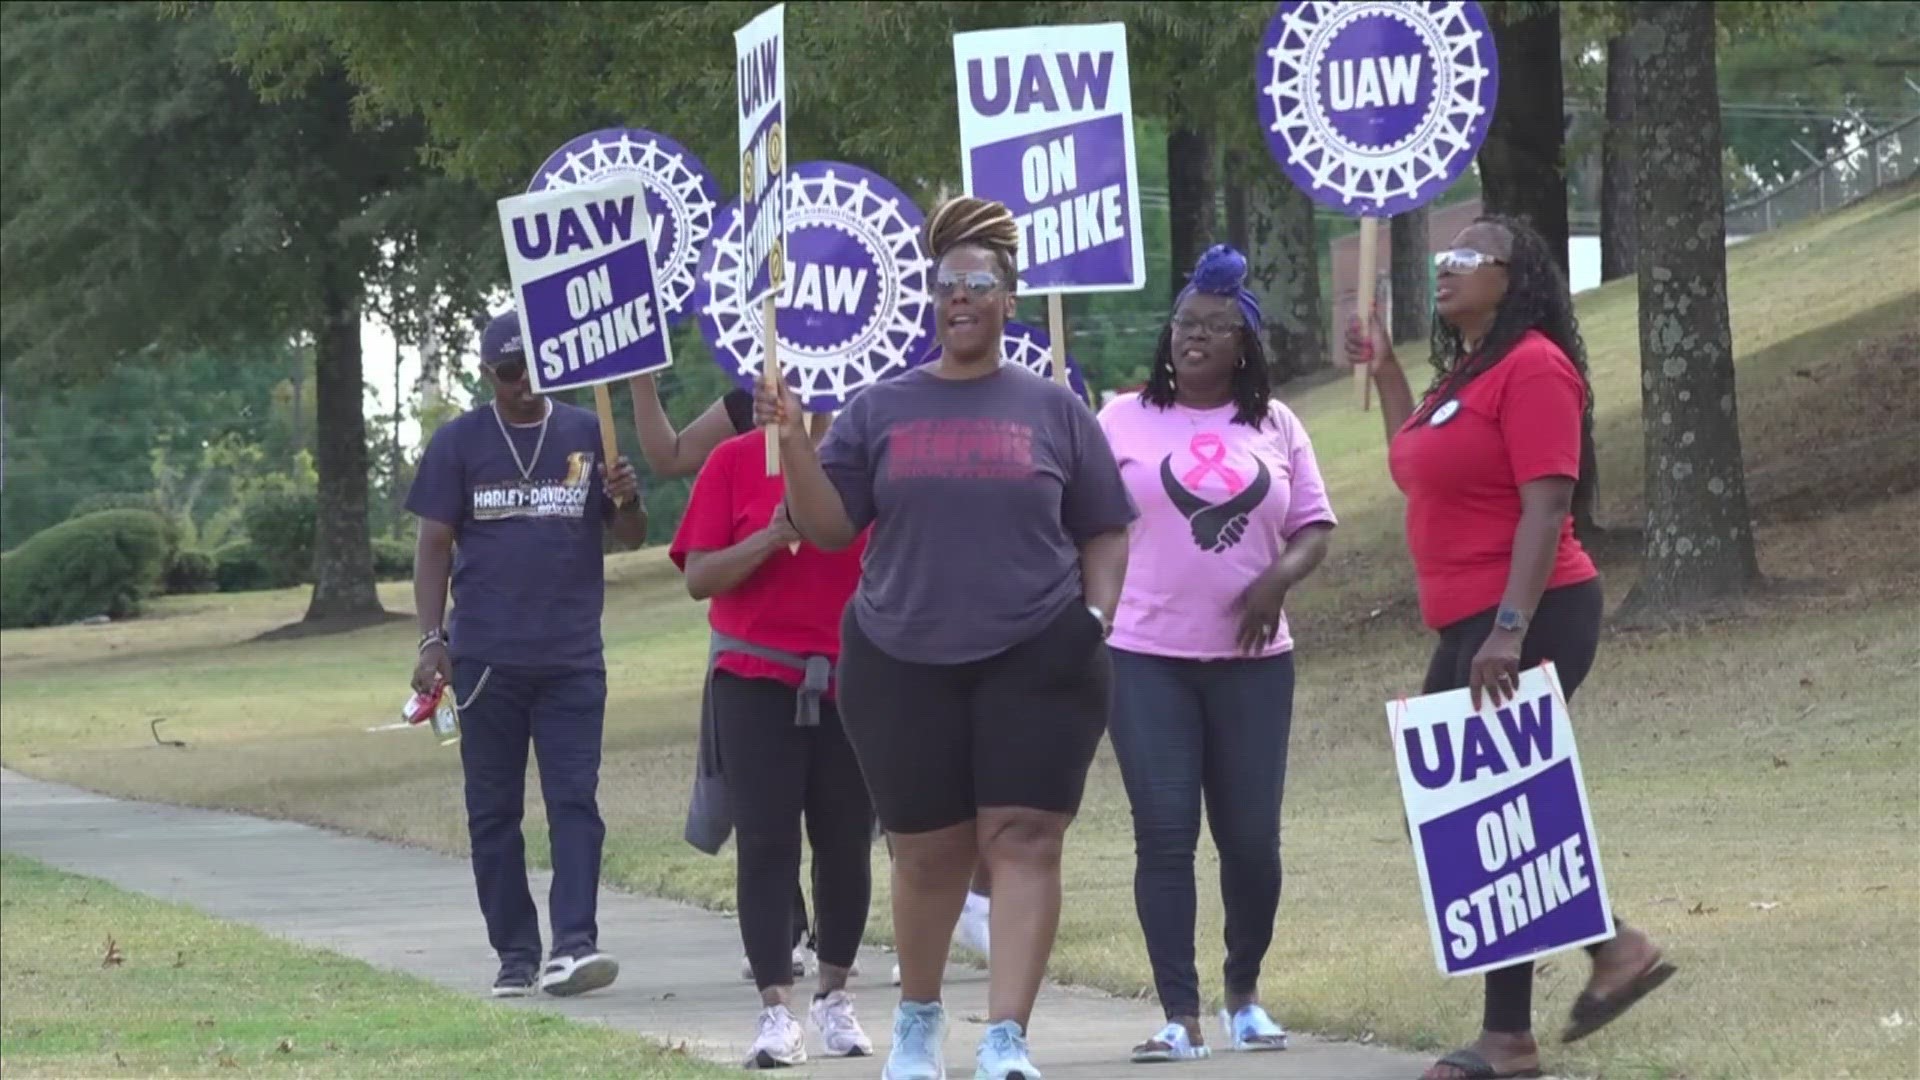 Some striking workers in Memphis say they are prepared to stay off the job as long as it takes.